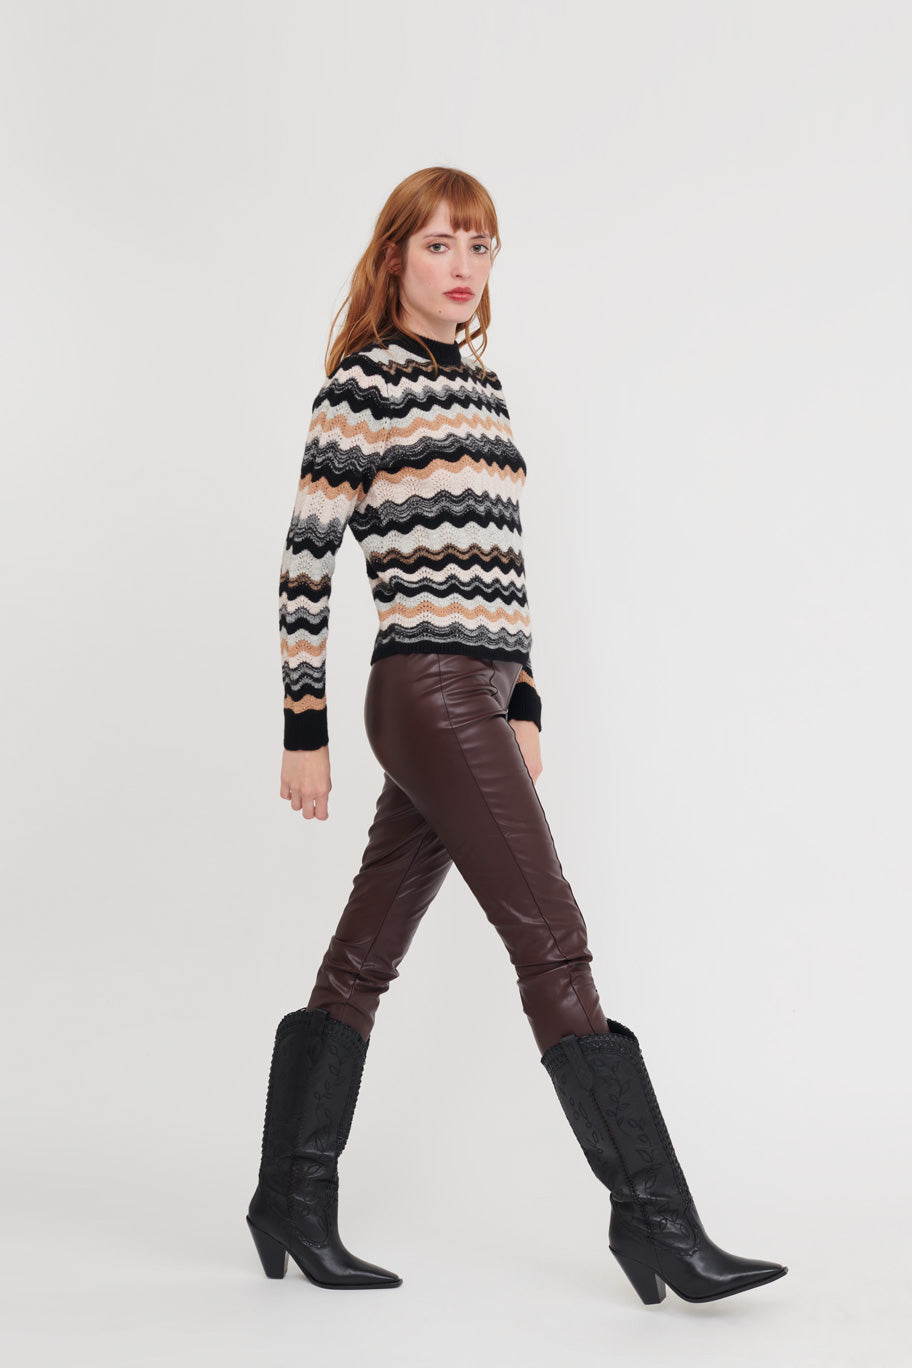 Read headed model wears a black and natural stripe crew neck with a pretty wave effect stripe.